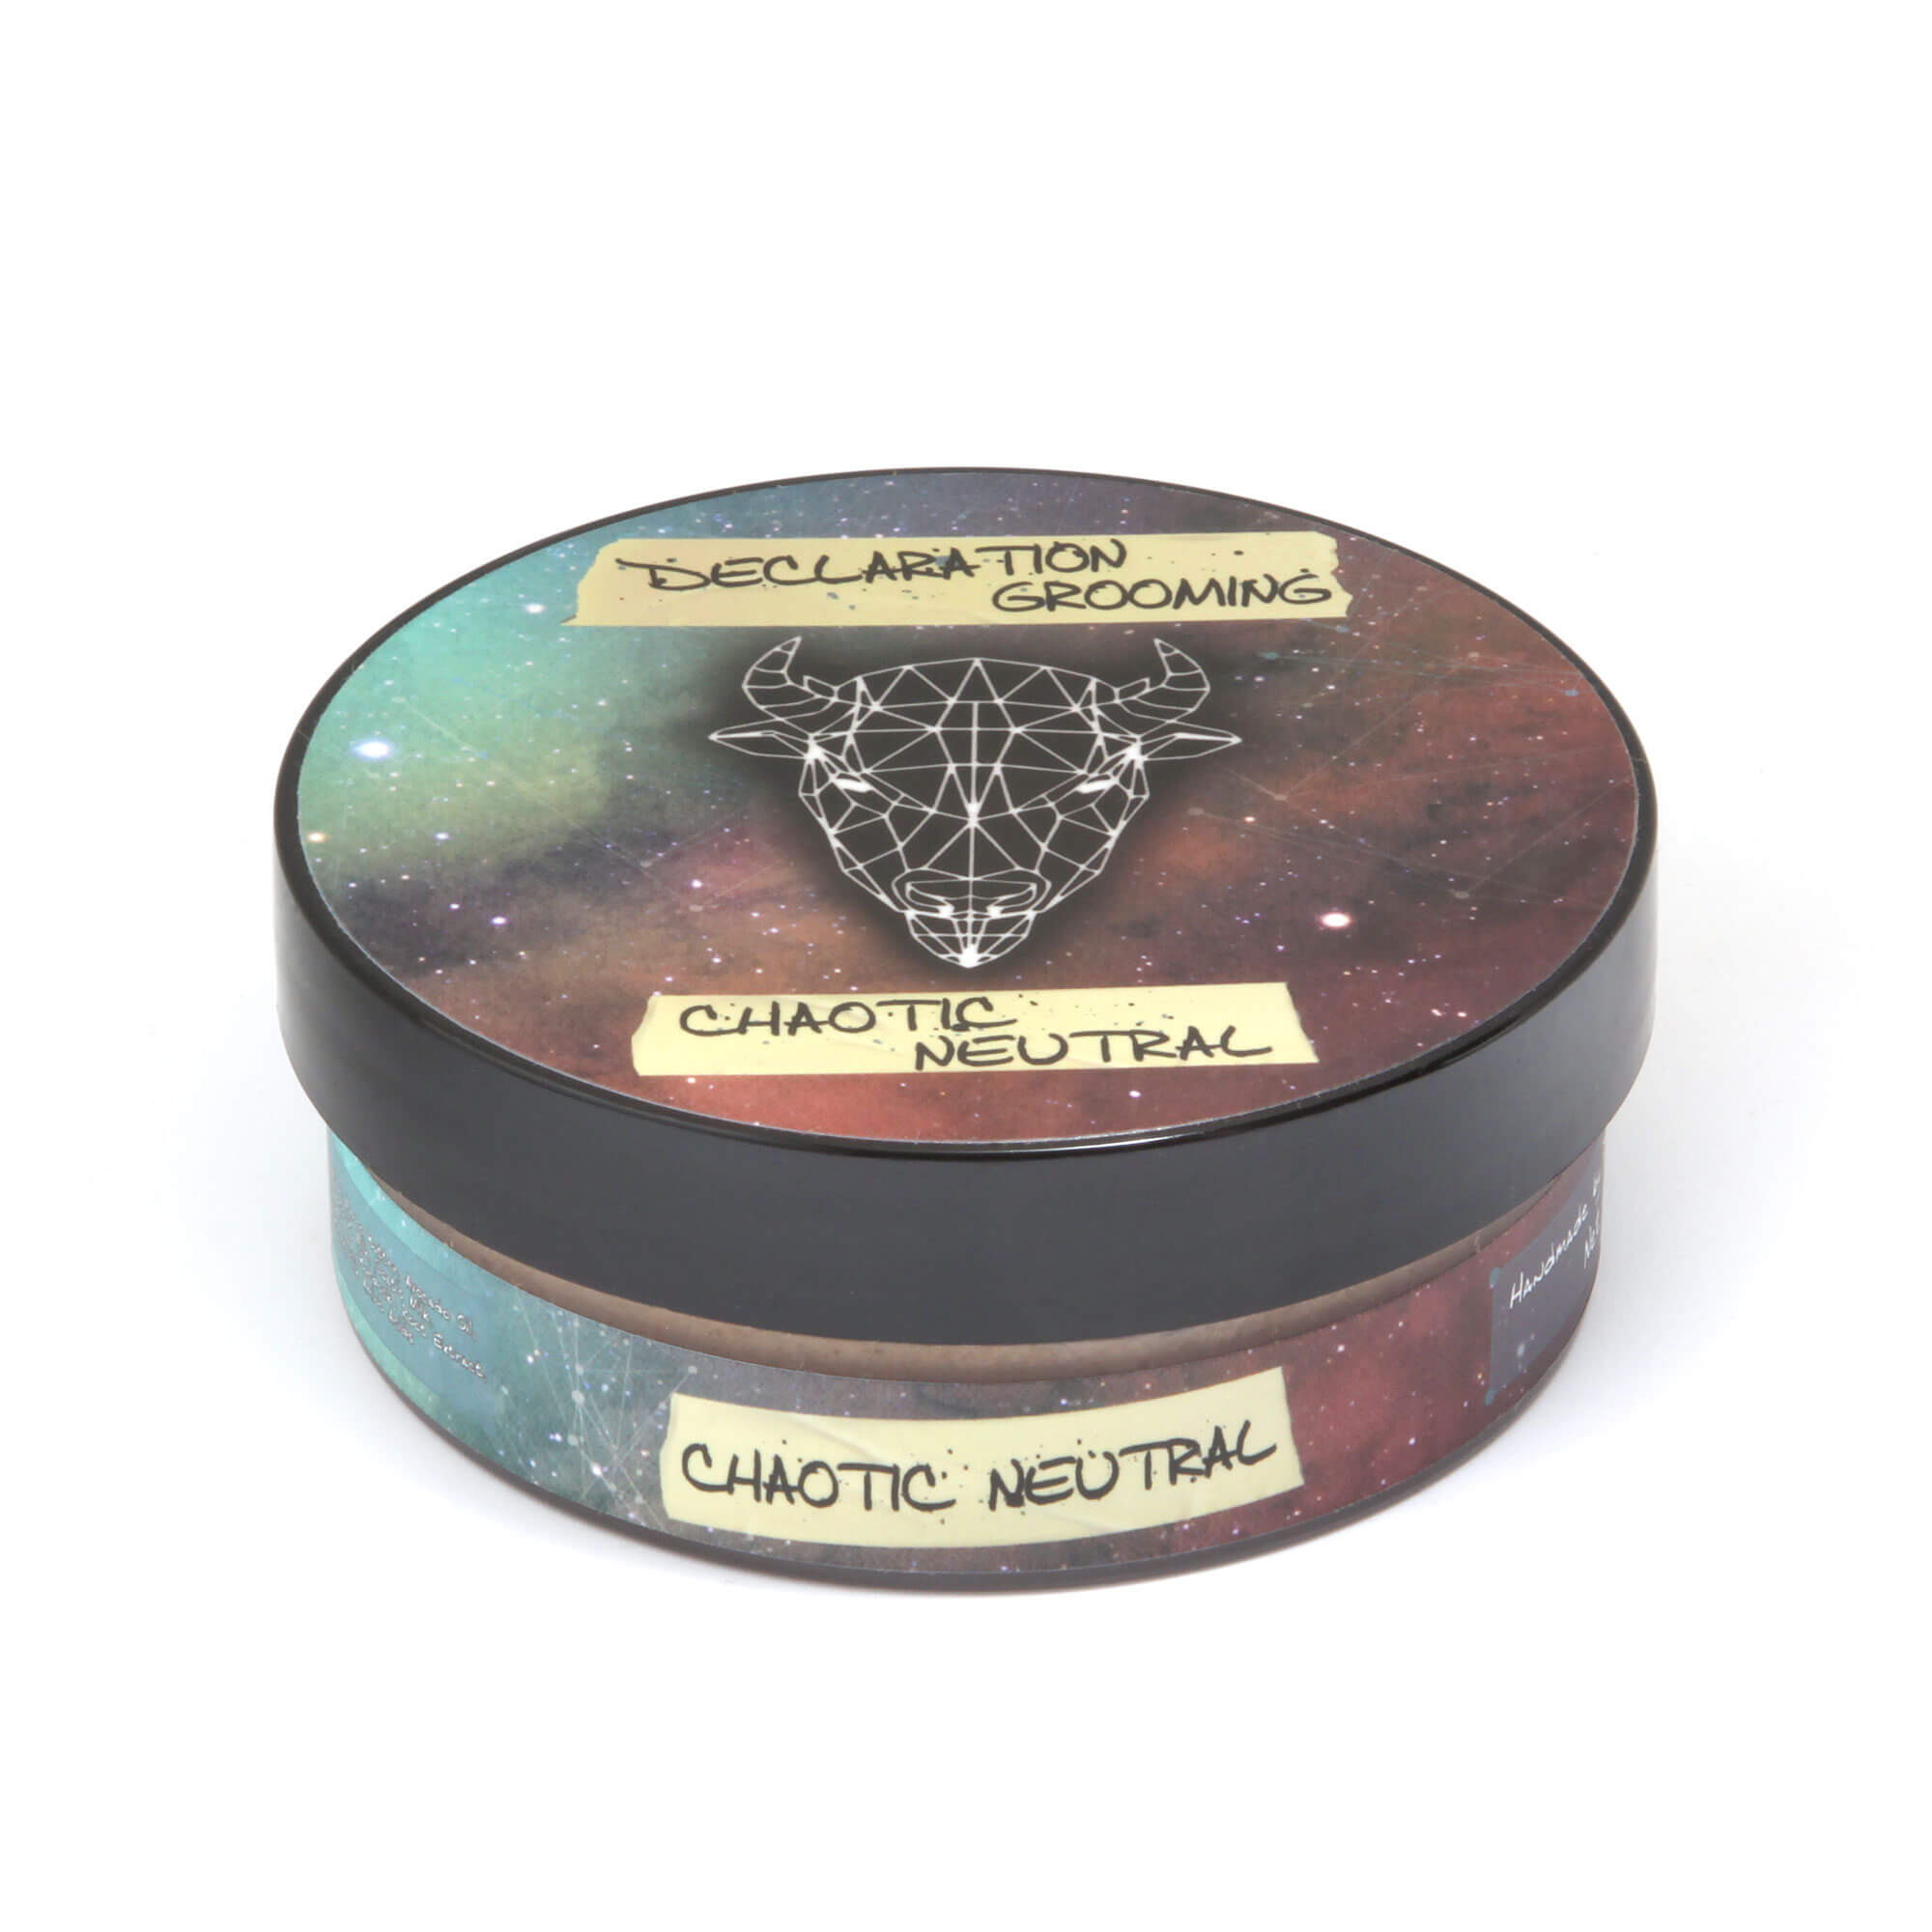 Declaration Grooming Chaotic Neutral Shaving Soap